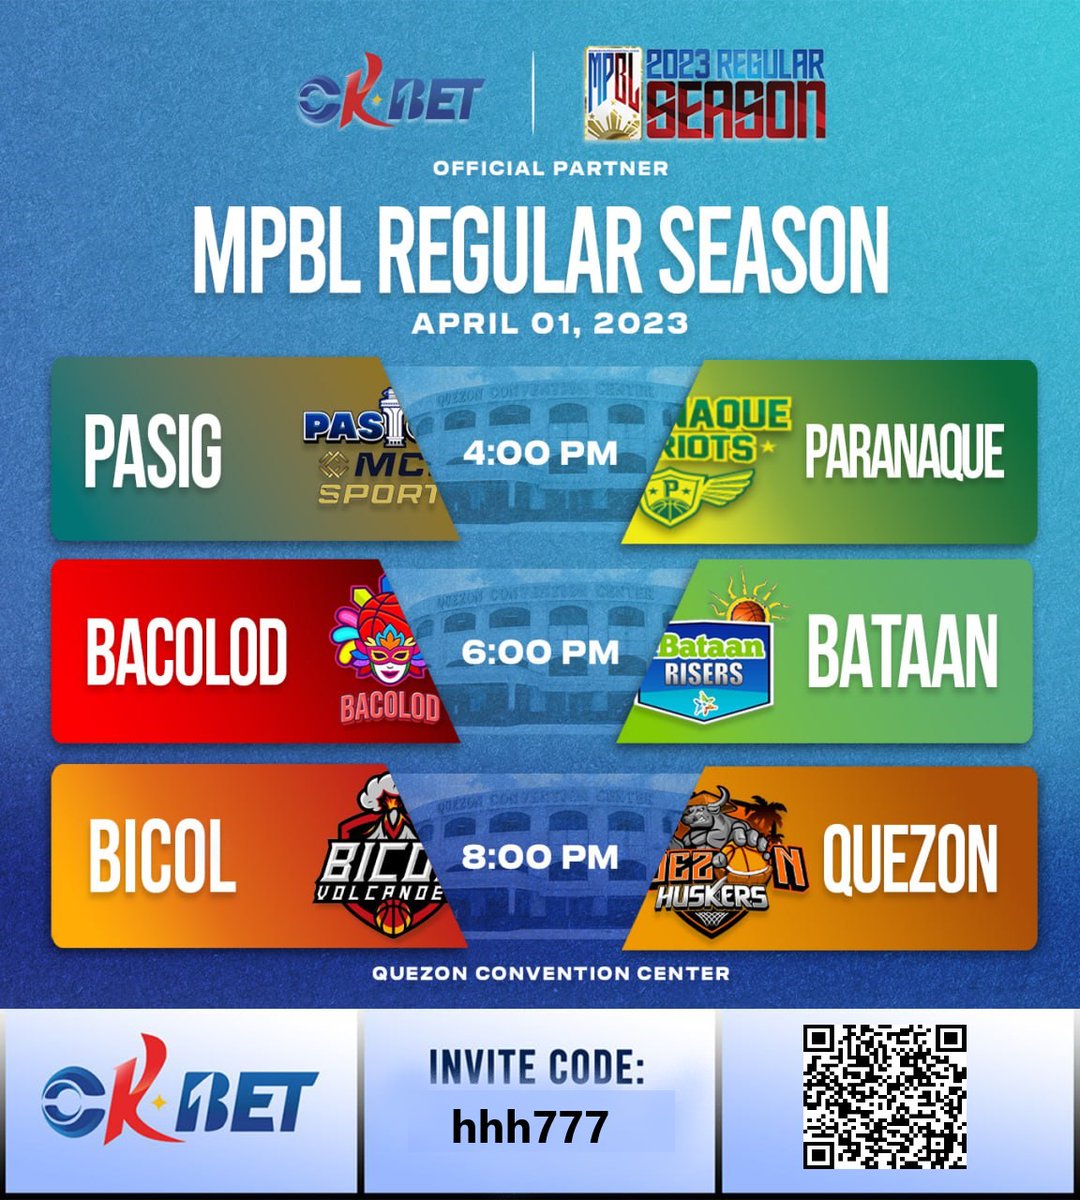 📷 GAMEDAY ALERT 📷 April 1, 2023
The MPBL returns to the Quezon
Join the excitement and increase your chances of winning big!
Register now! Copy this link on google chrome or scan the QR Code
okbet.com/?inviteCode=hh…
Check 📷 bit.ly/OKBetSJP
PM ME !!!
#mpbl2023 #okbet